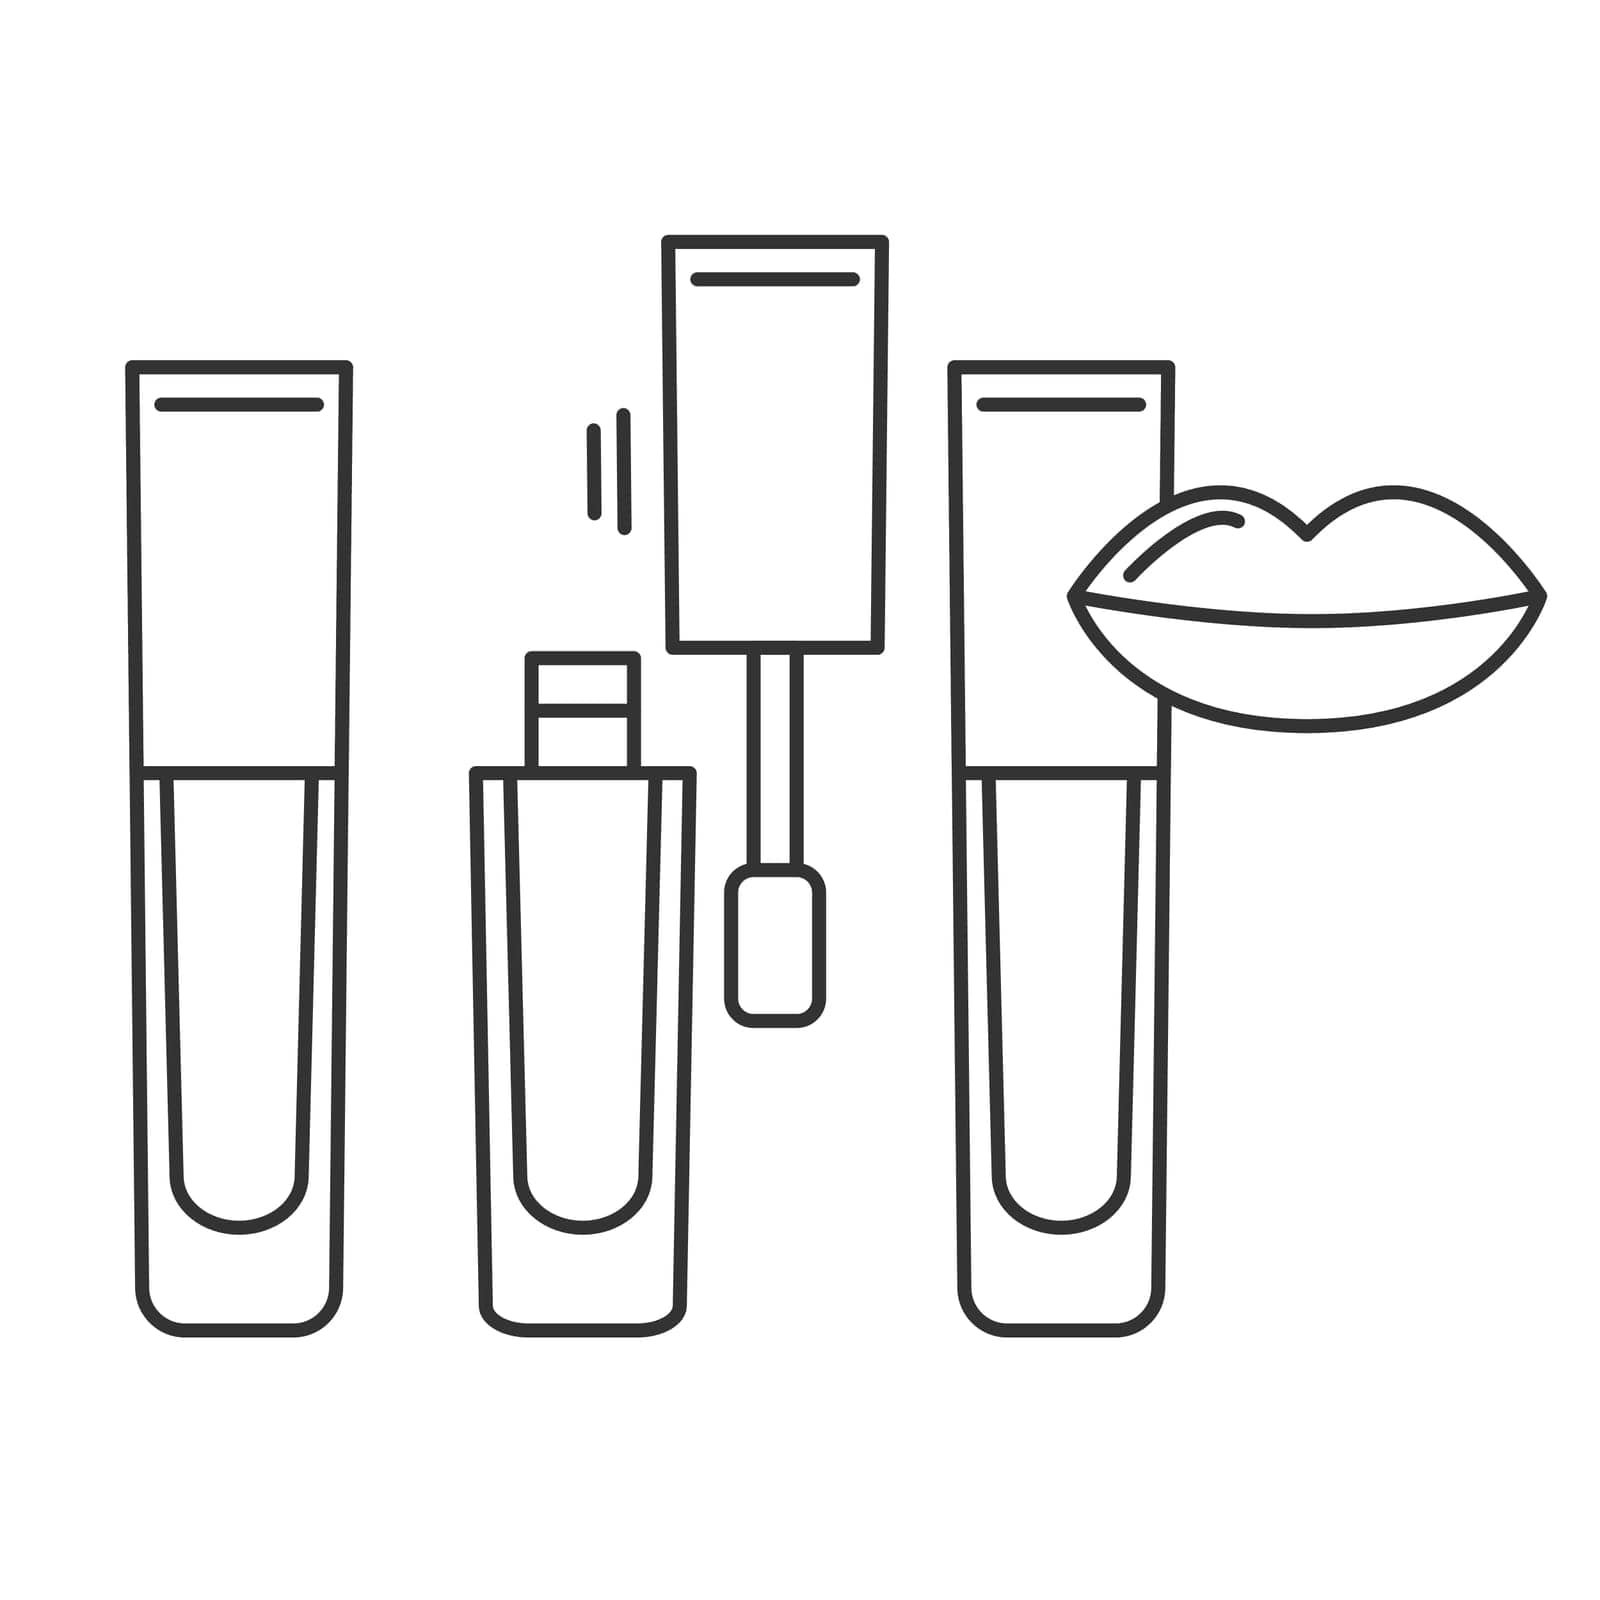 Lip gloss line art icon. Set of separate tube and brush. Closed, Opened Lip Gloss, Lipstick Package.Lips makeup and cosmetology vector icon.Editable vector illustration eps10